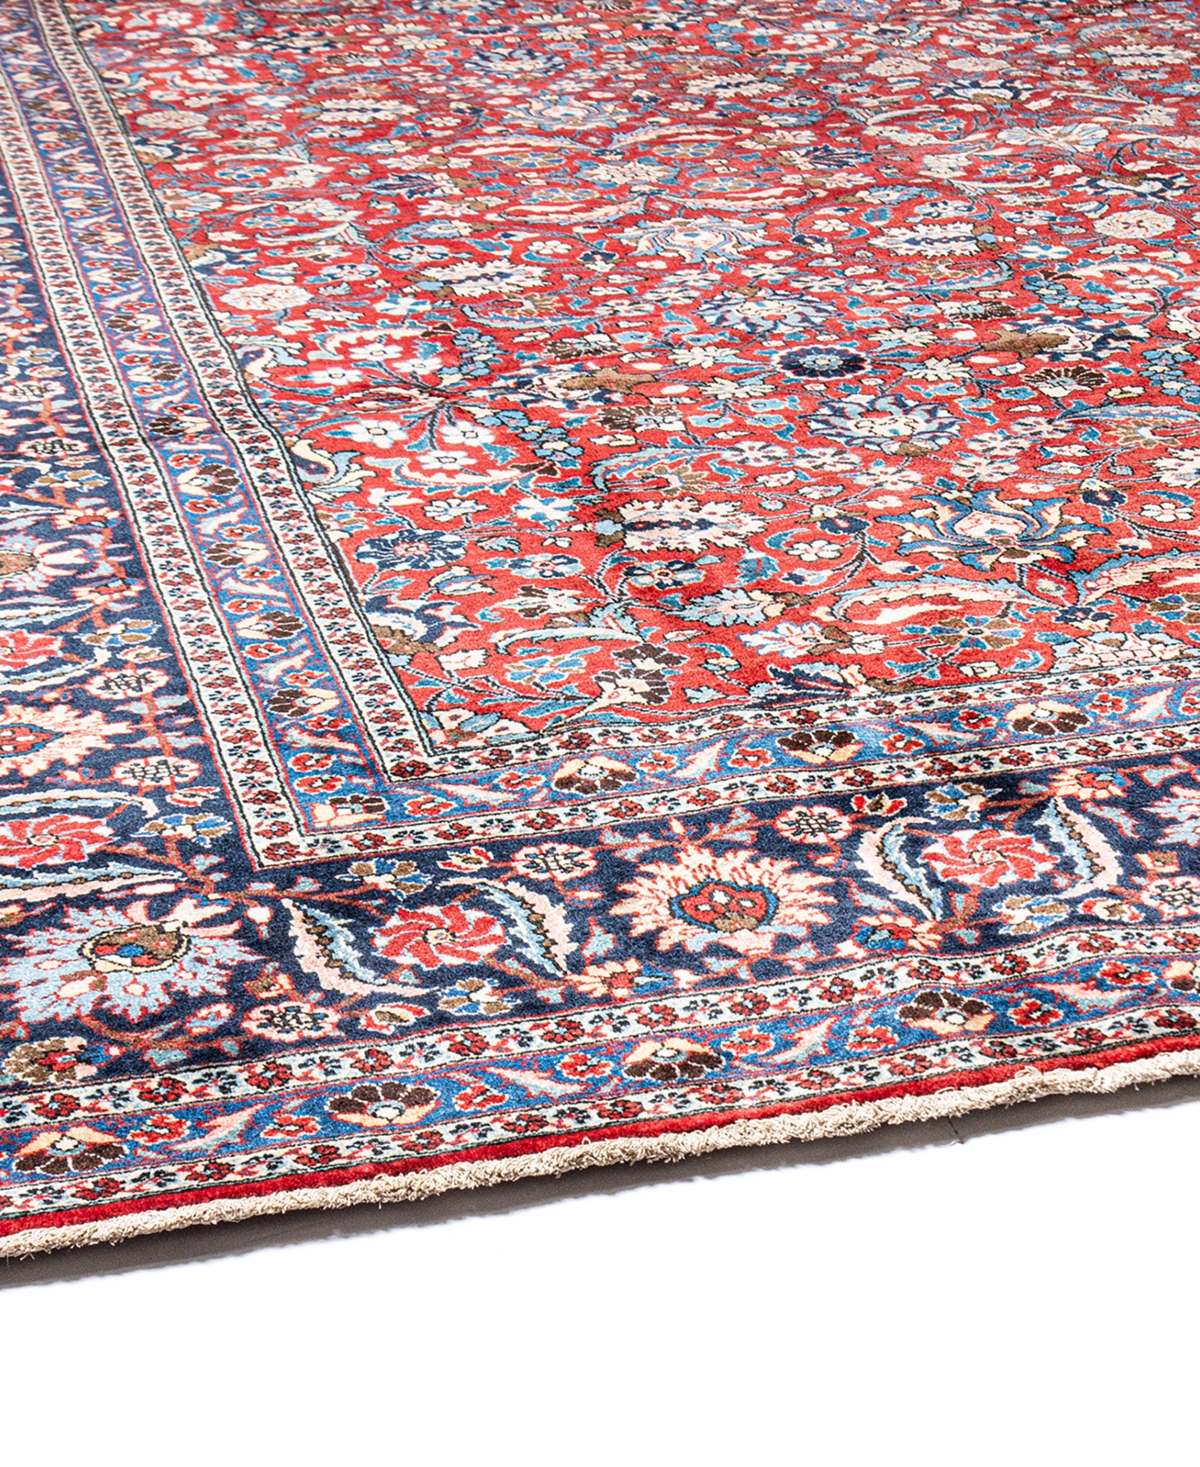 Shop Bb Rugs One Of A Kind Baktiary 9'11x12'10 Area Rug In Red